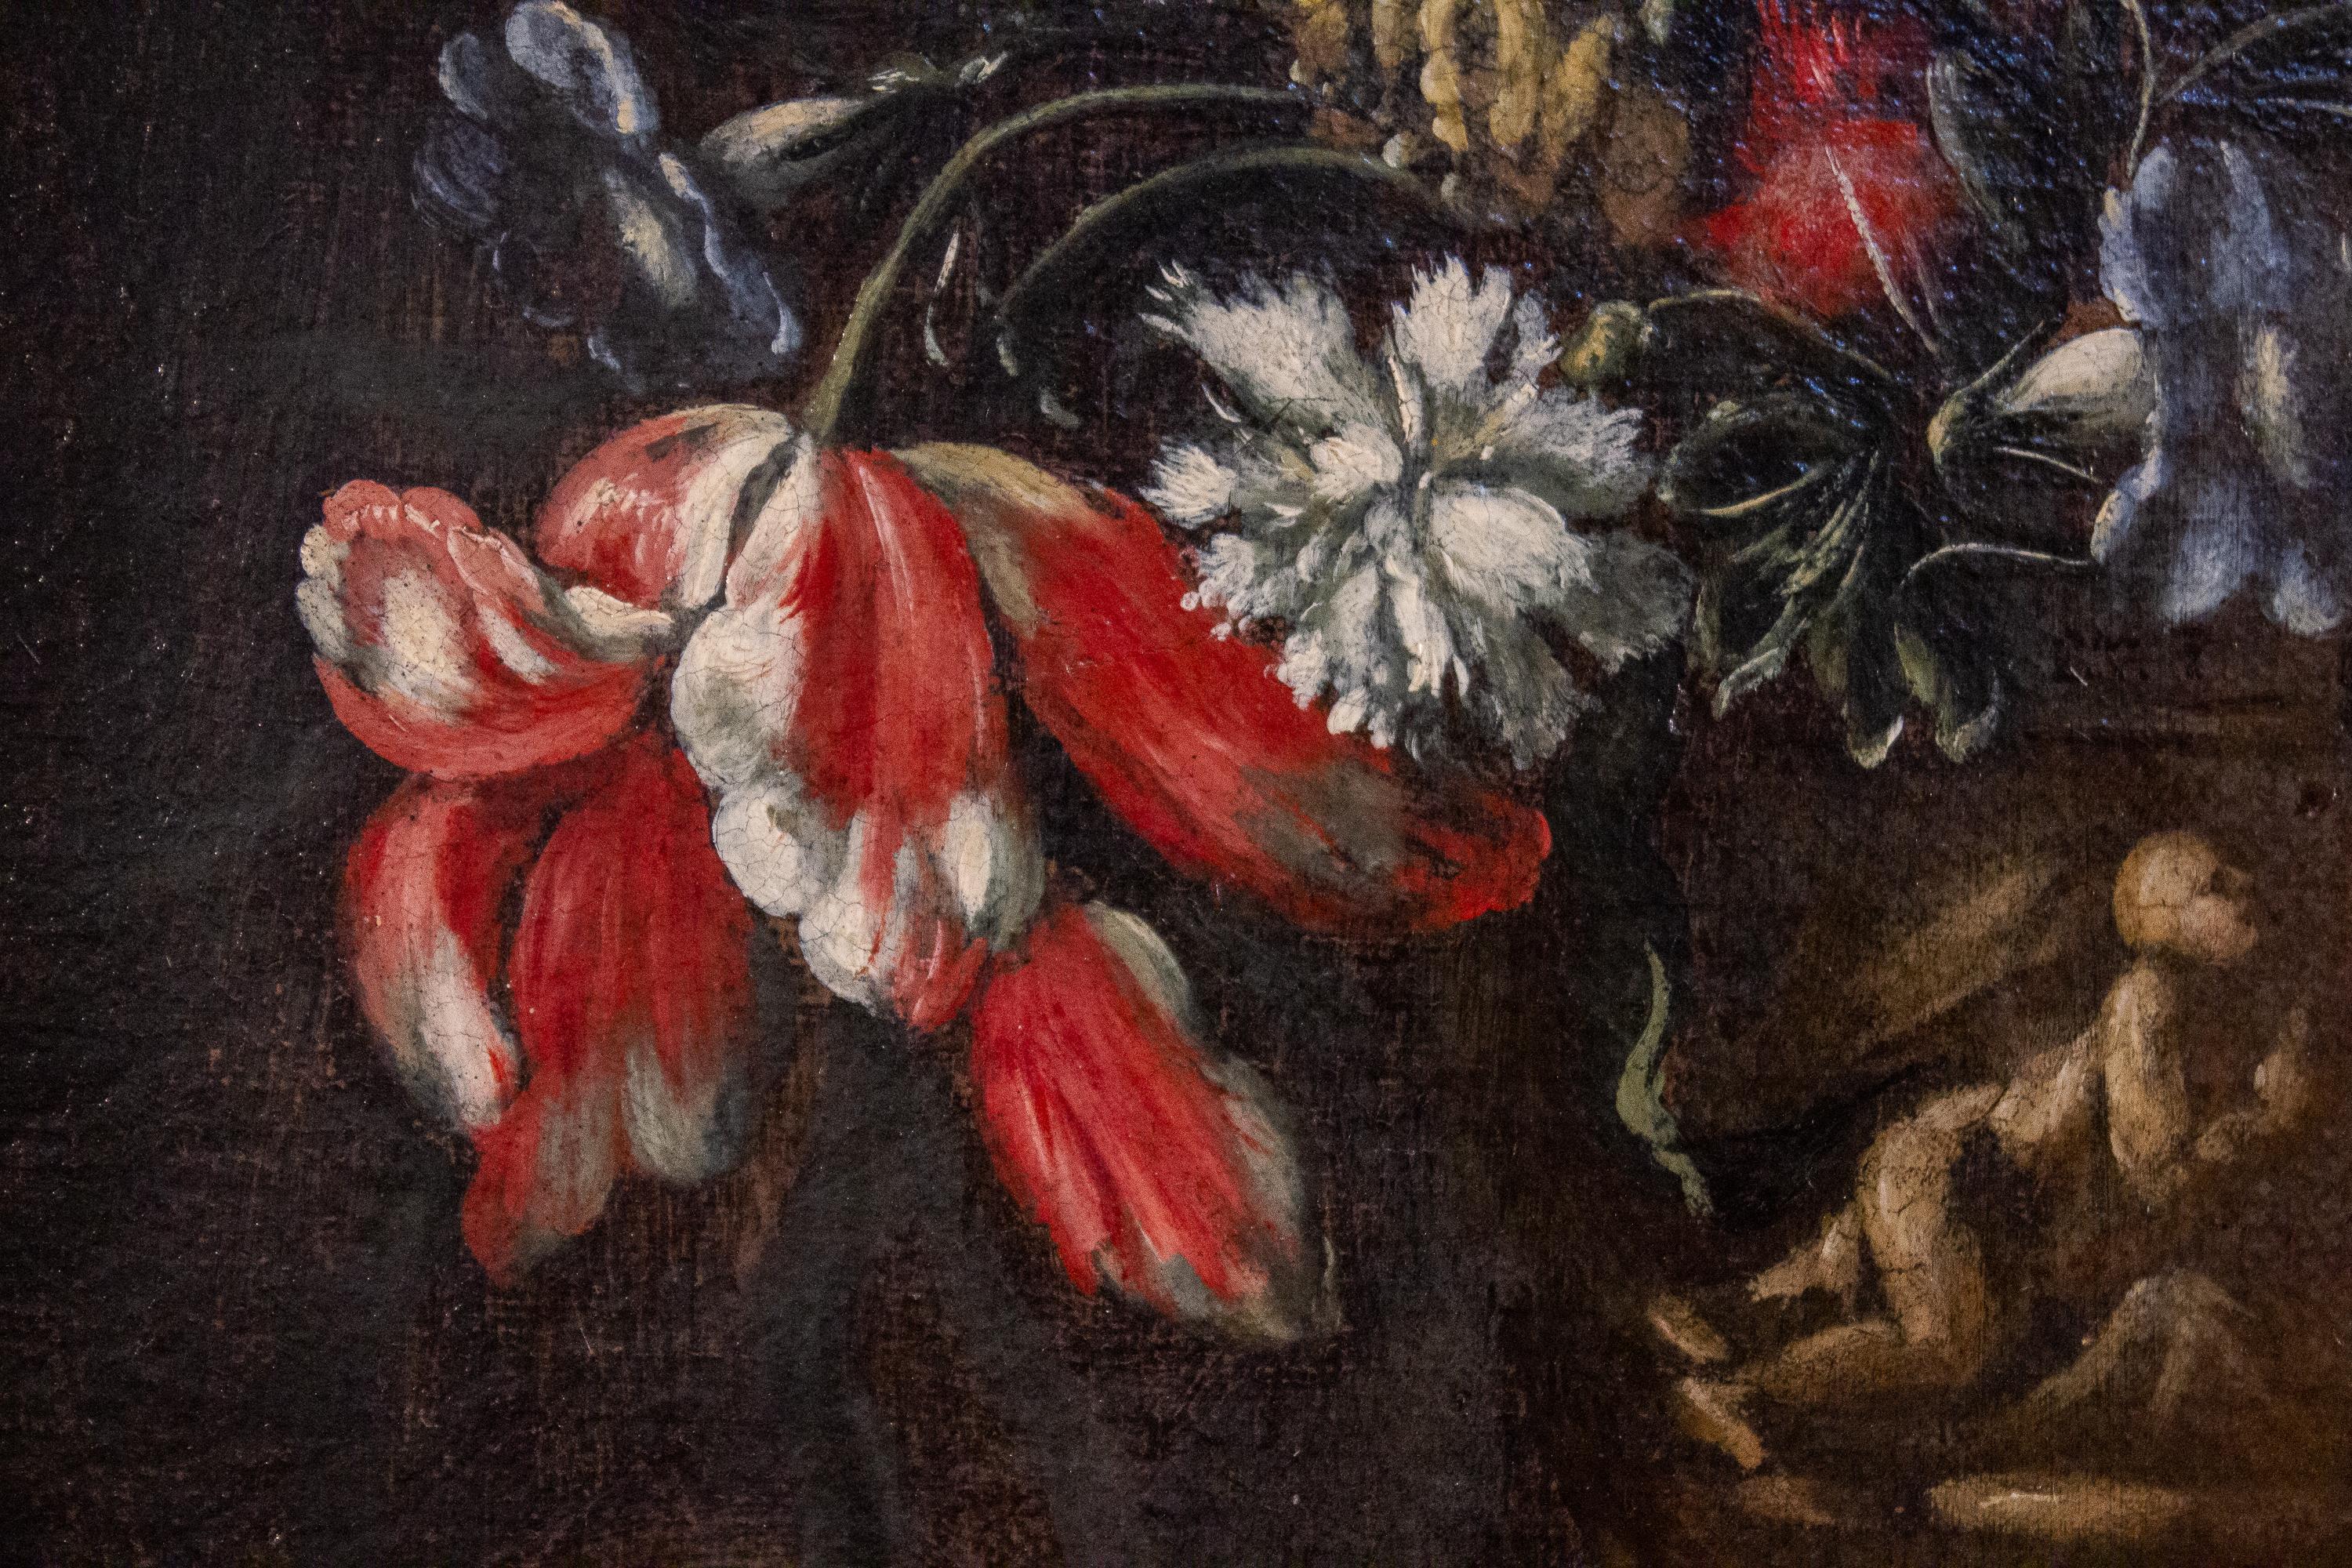 Pair of 18th century Italian Still Life Paintings of Flowers   For Sale 5